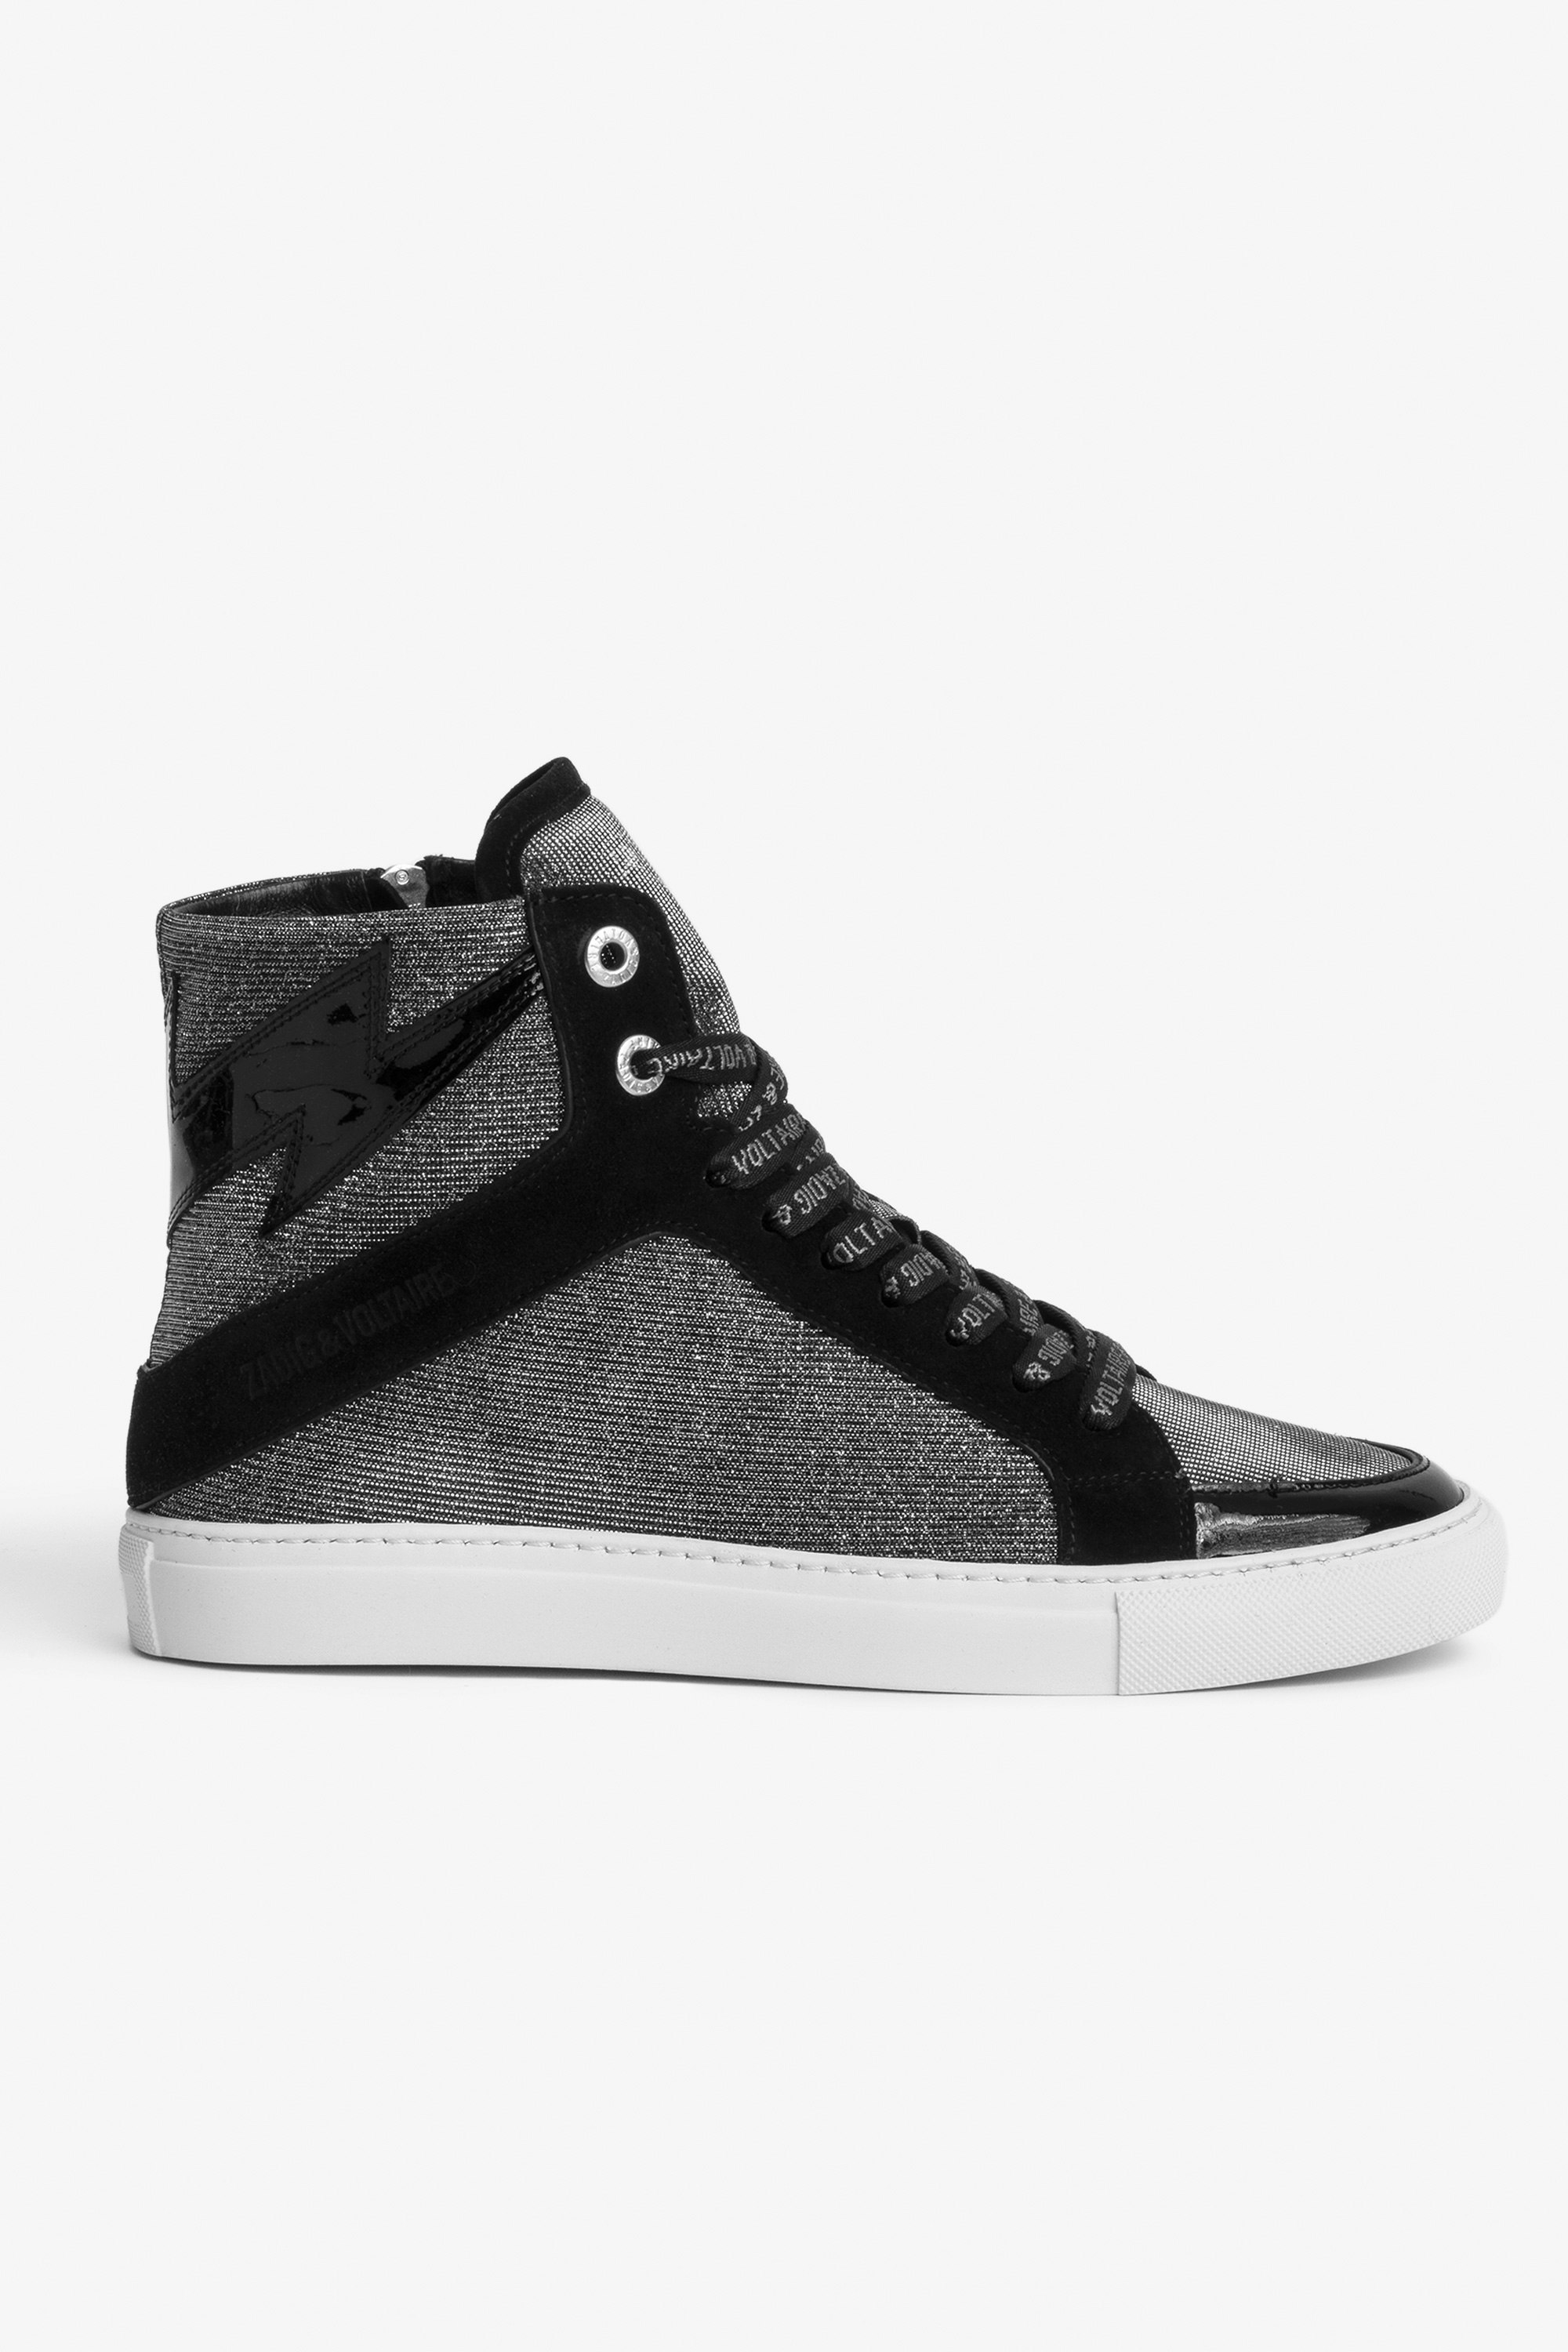 ZV1747 High Flash スニーカー Women’s black leather and silver glitter high-top sneakers with lightning bolt patch